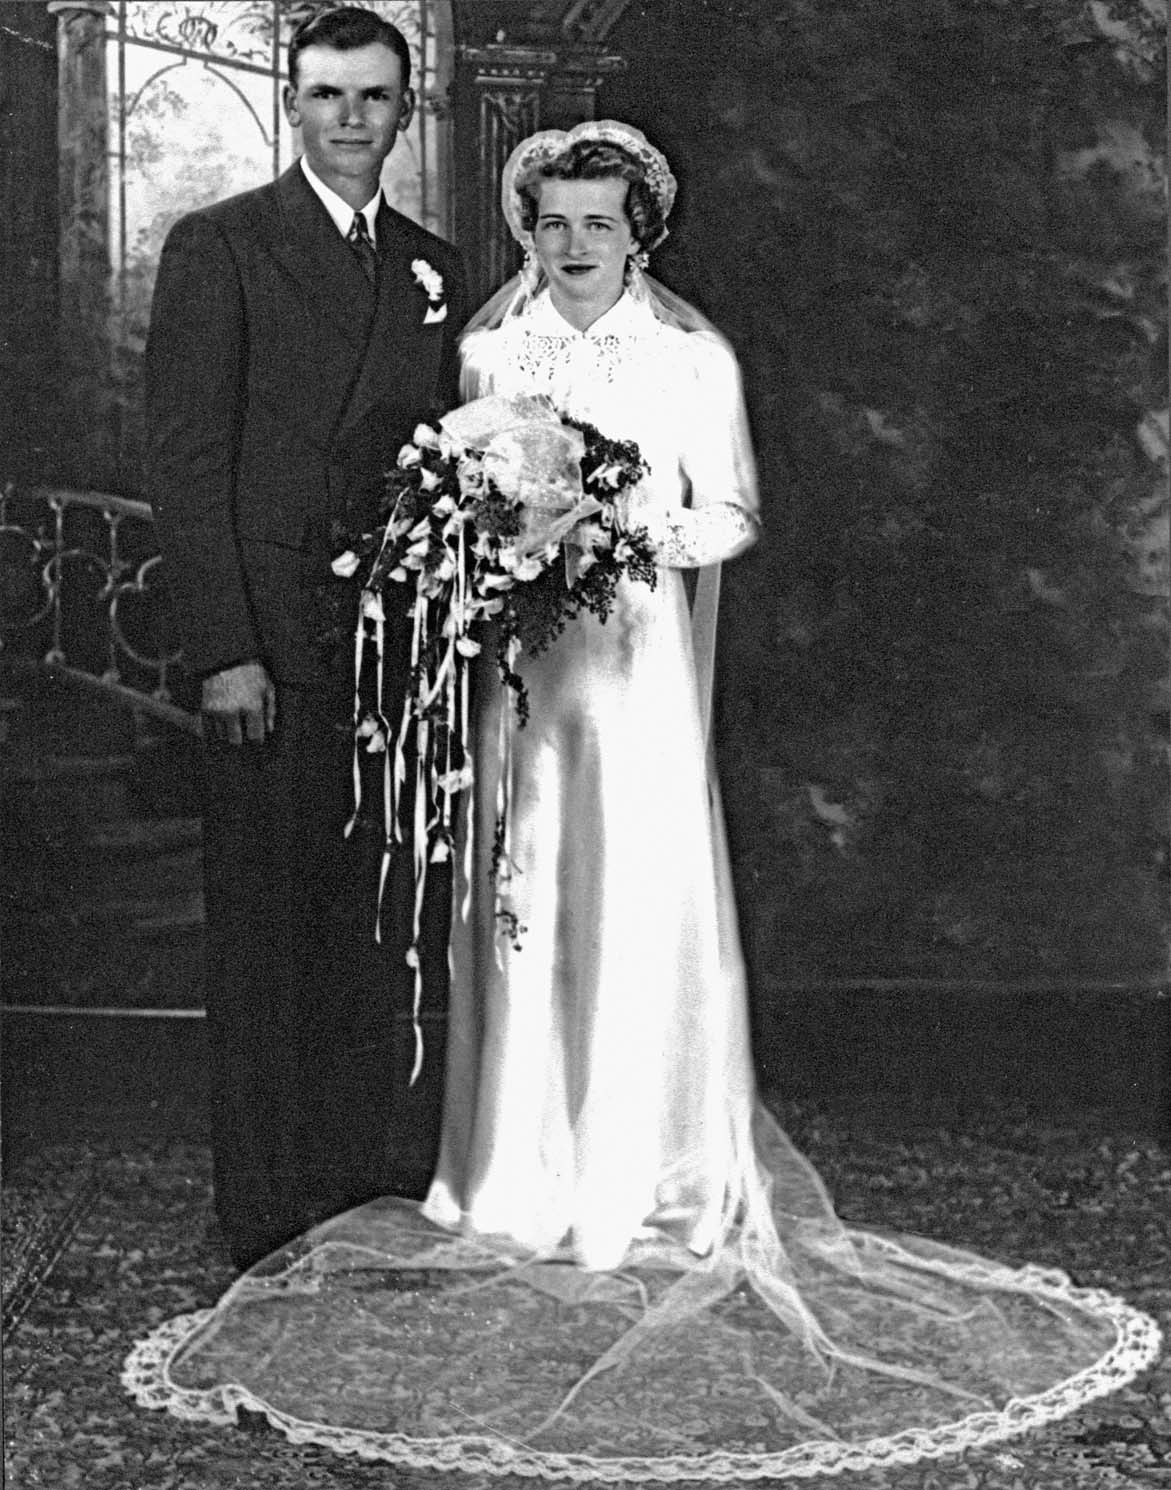 A young man and woman pose in their wedding dress and suit